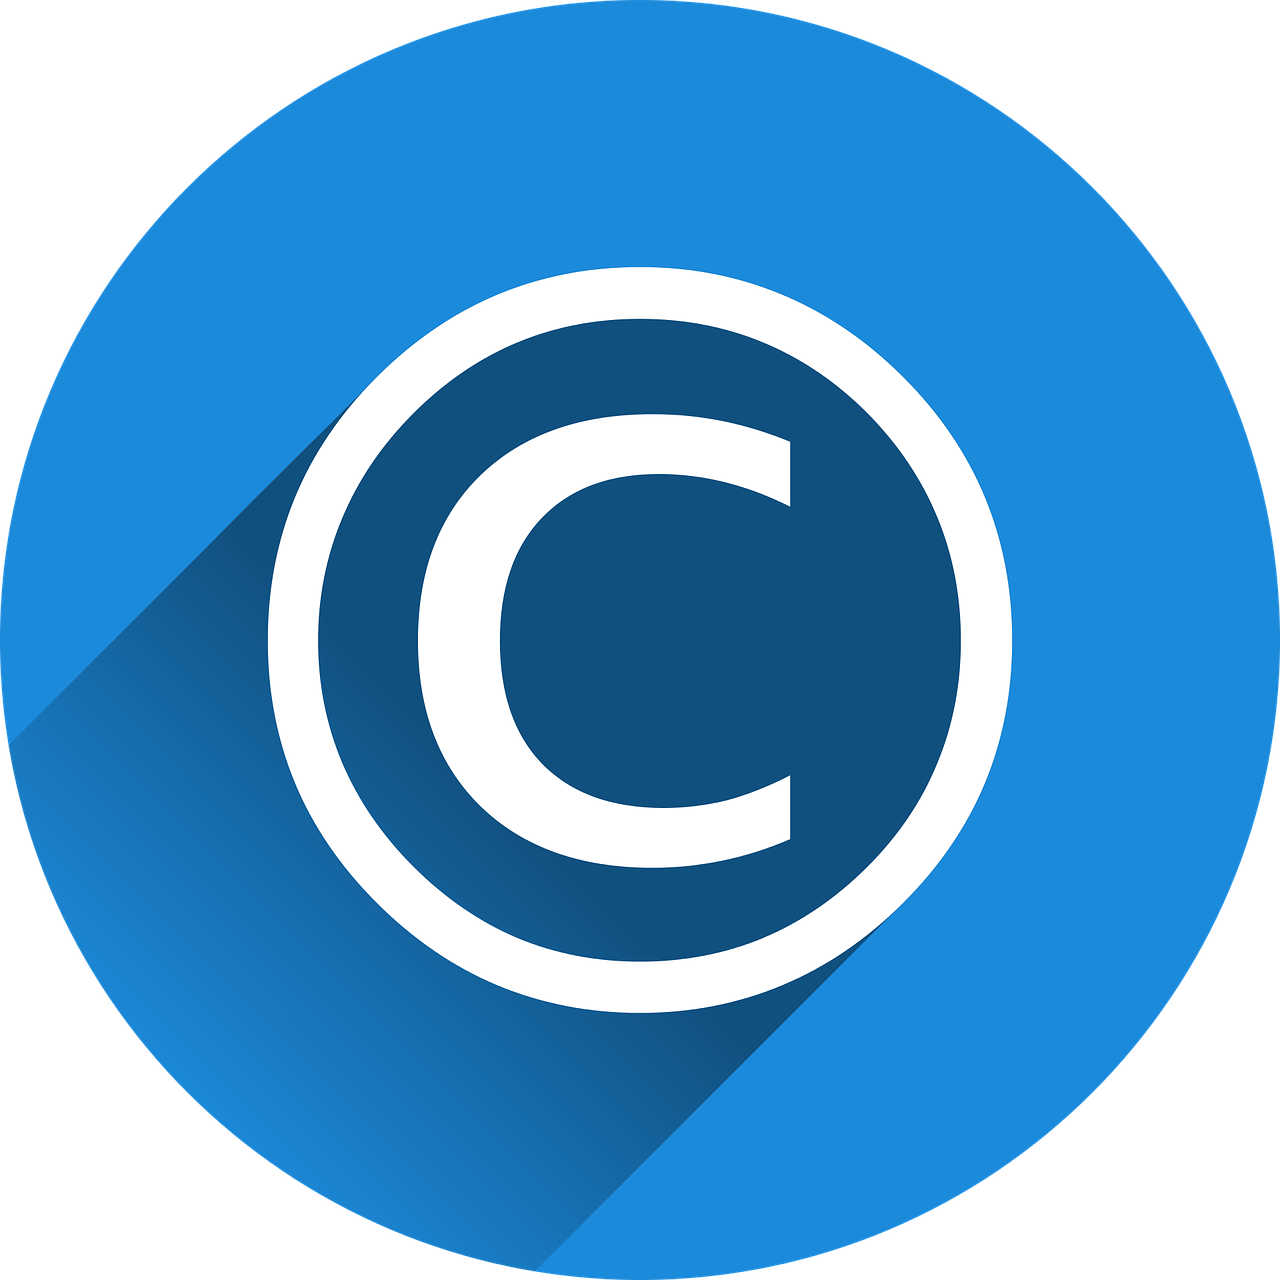 copyright rights icon free photo